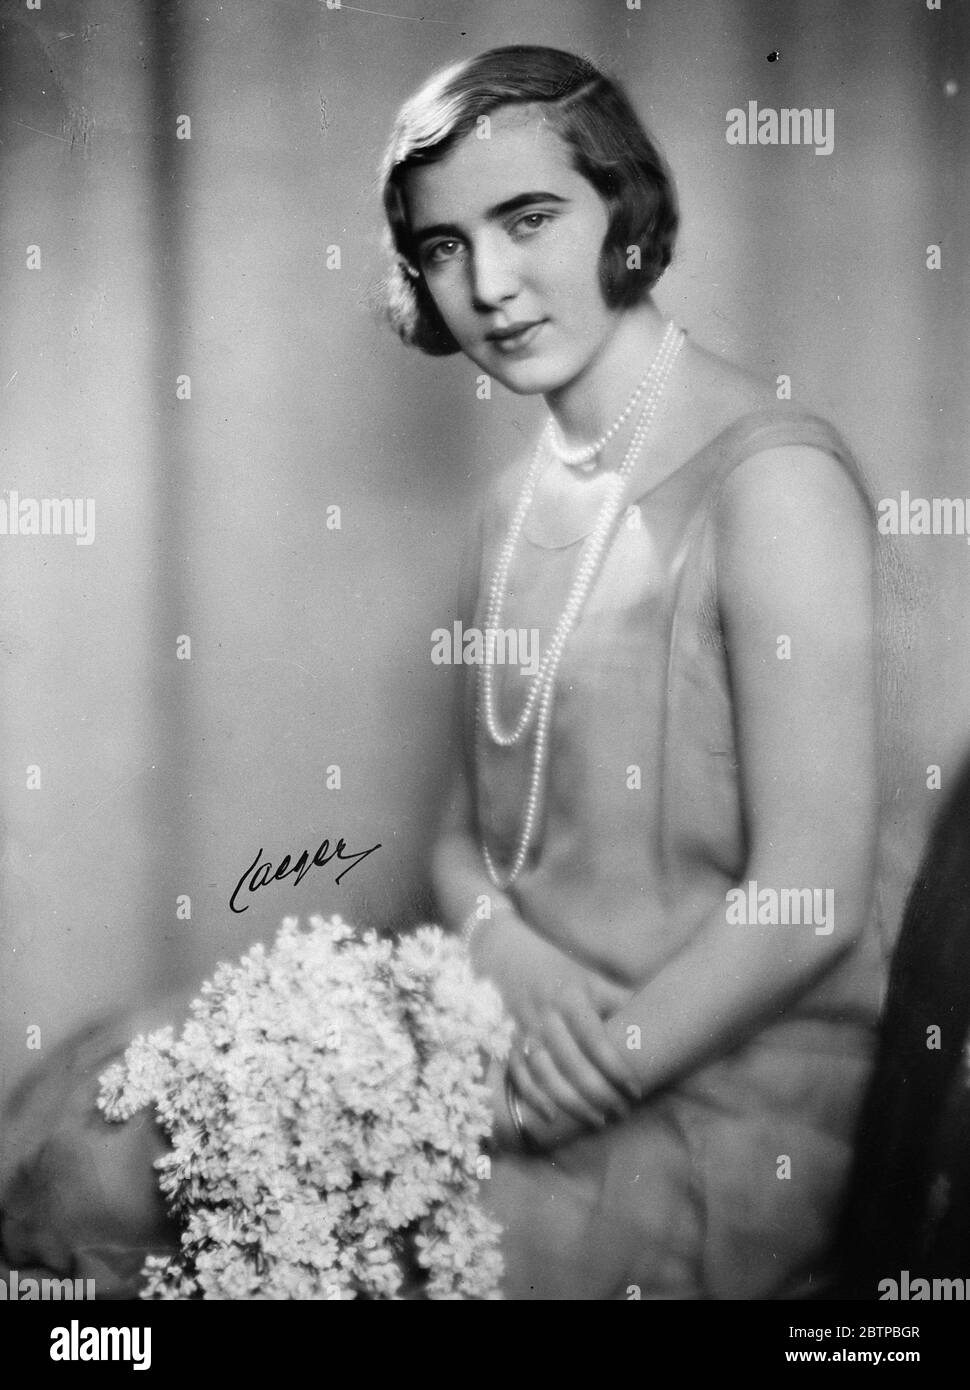 The Royal wedding . A new picture of Princess Ingrid of Sweden , who will be a bridesmaid at the wedding of Prince Olaf of Norway and Princess Martha of Sweden . 19 March 1929 Stock Photo